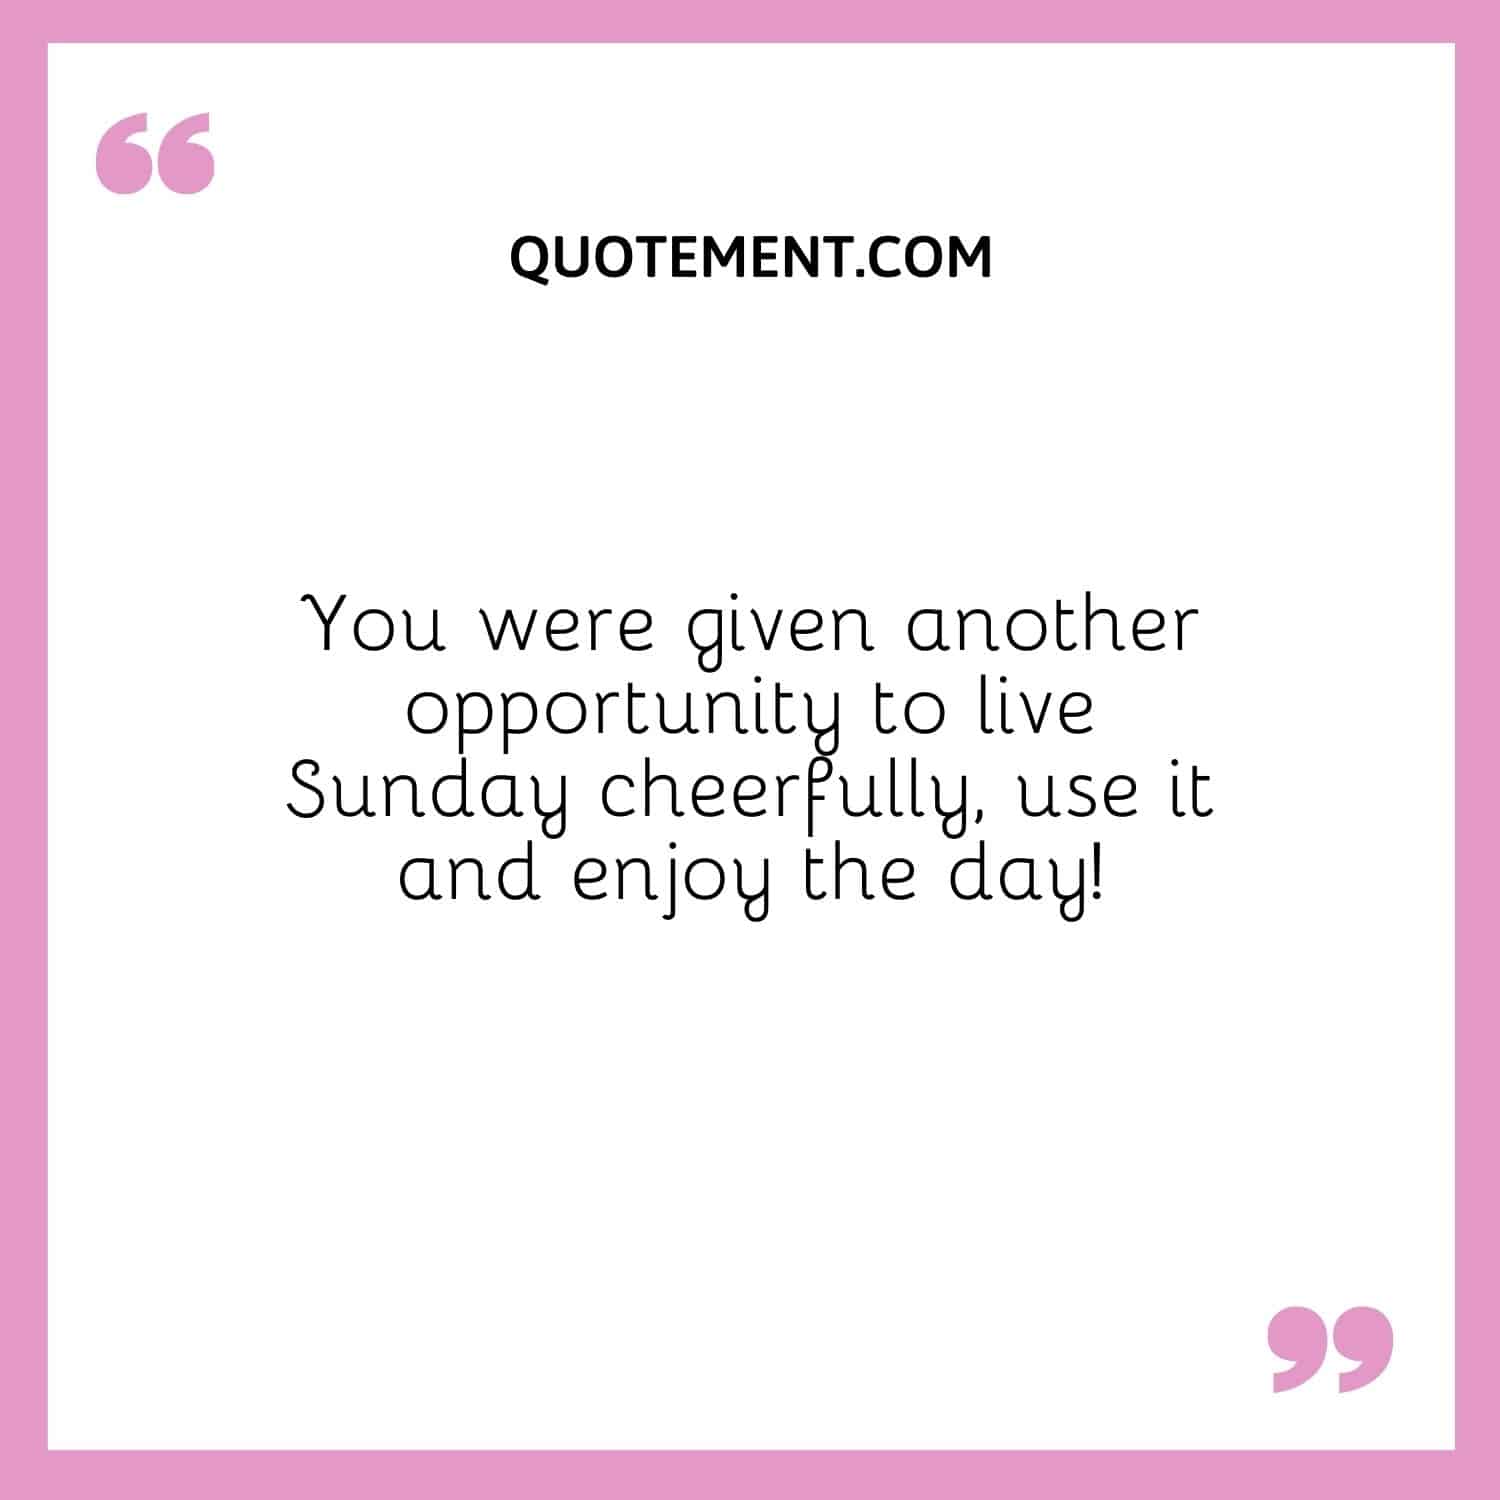 You were given another opportunity to live Sunday cheerfully, use it and enjoy the day!